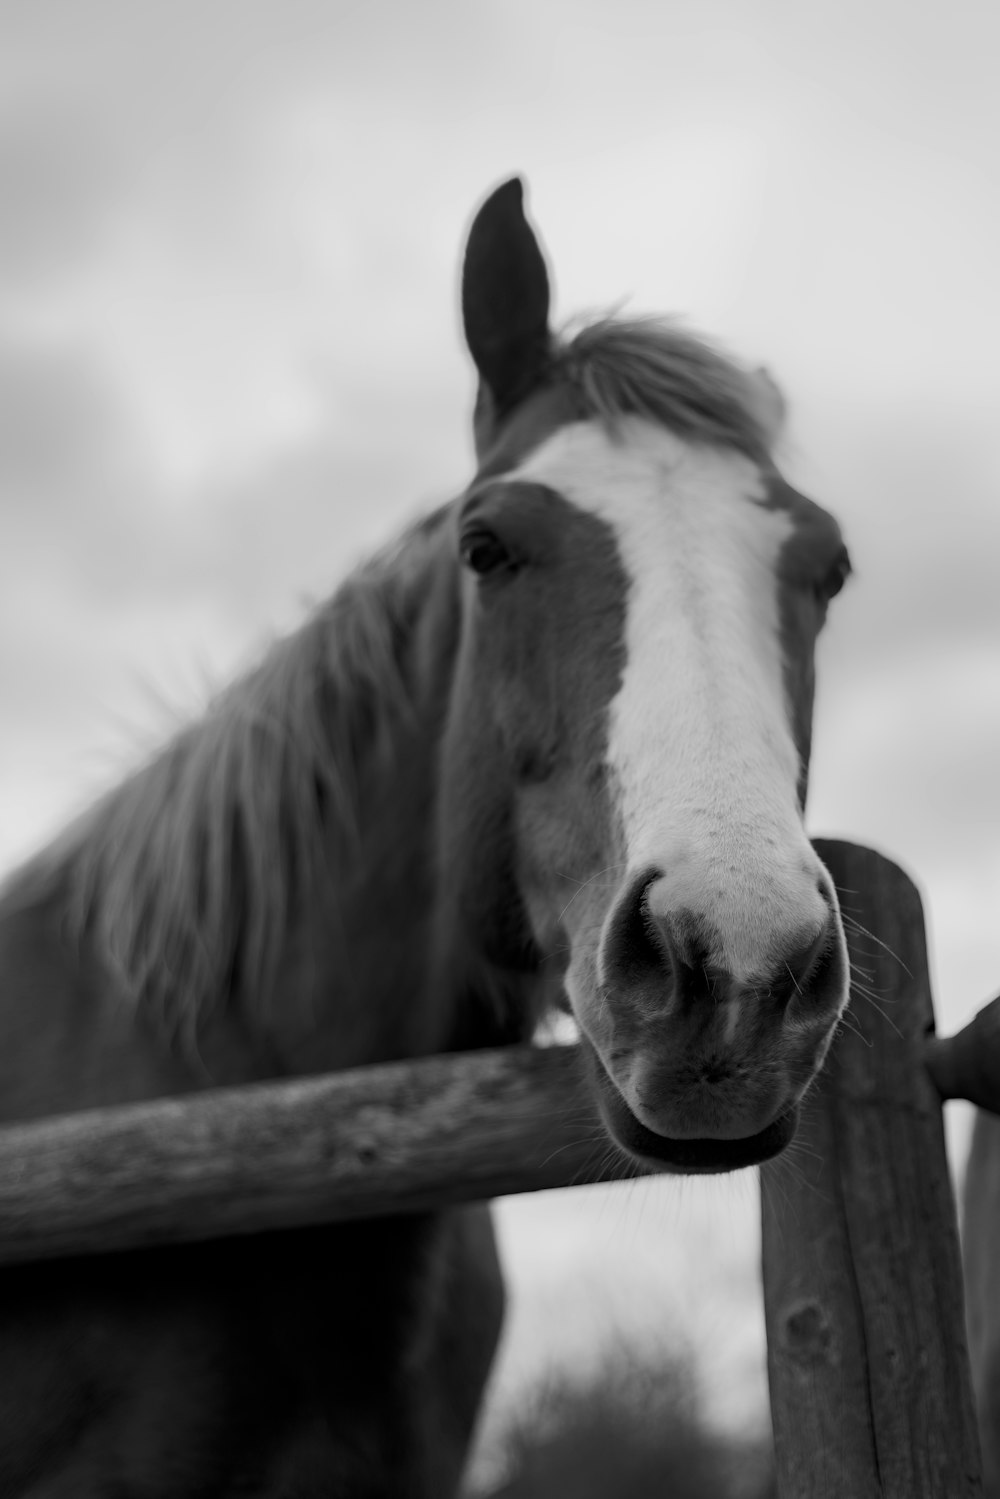 a black and white photo of a horse looking over a fence